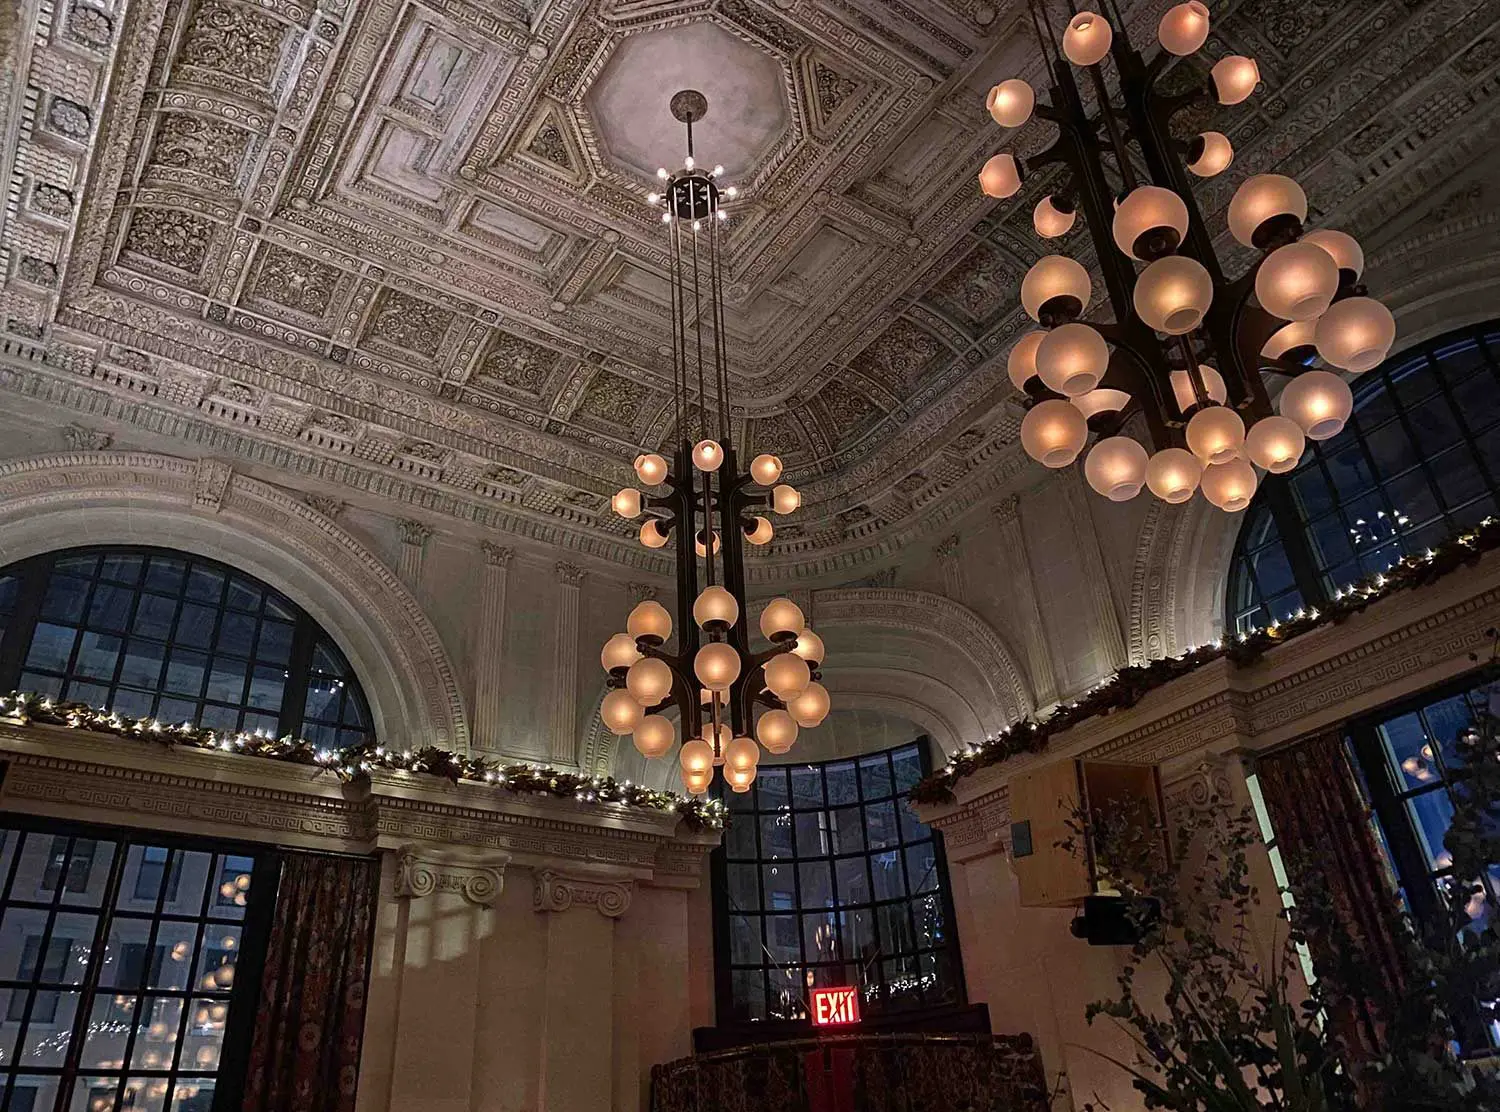 Nine Orchard The stunning Swan Room, today a bar occupying the former bank teller room, with vaulted ceilings, luxurious booths and pink Tennessee marble walls